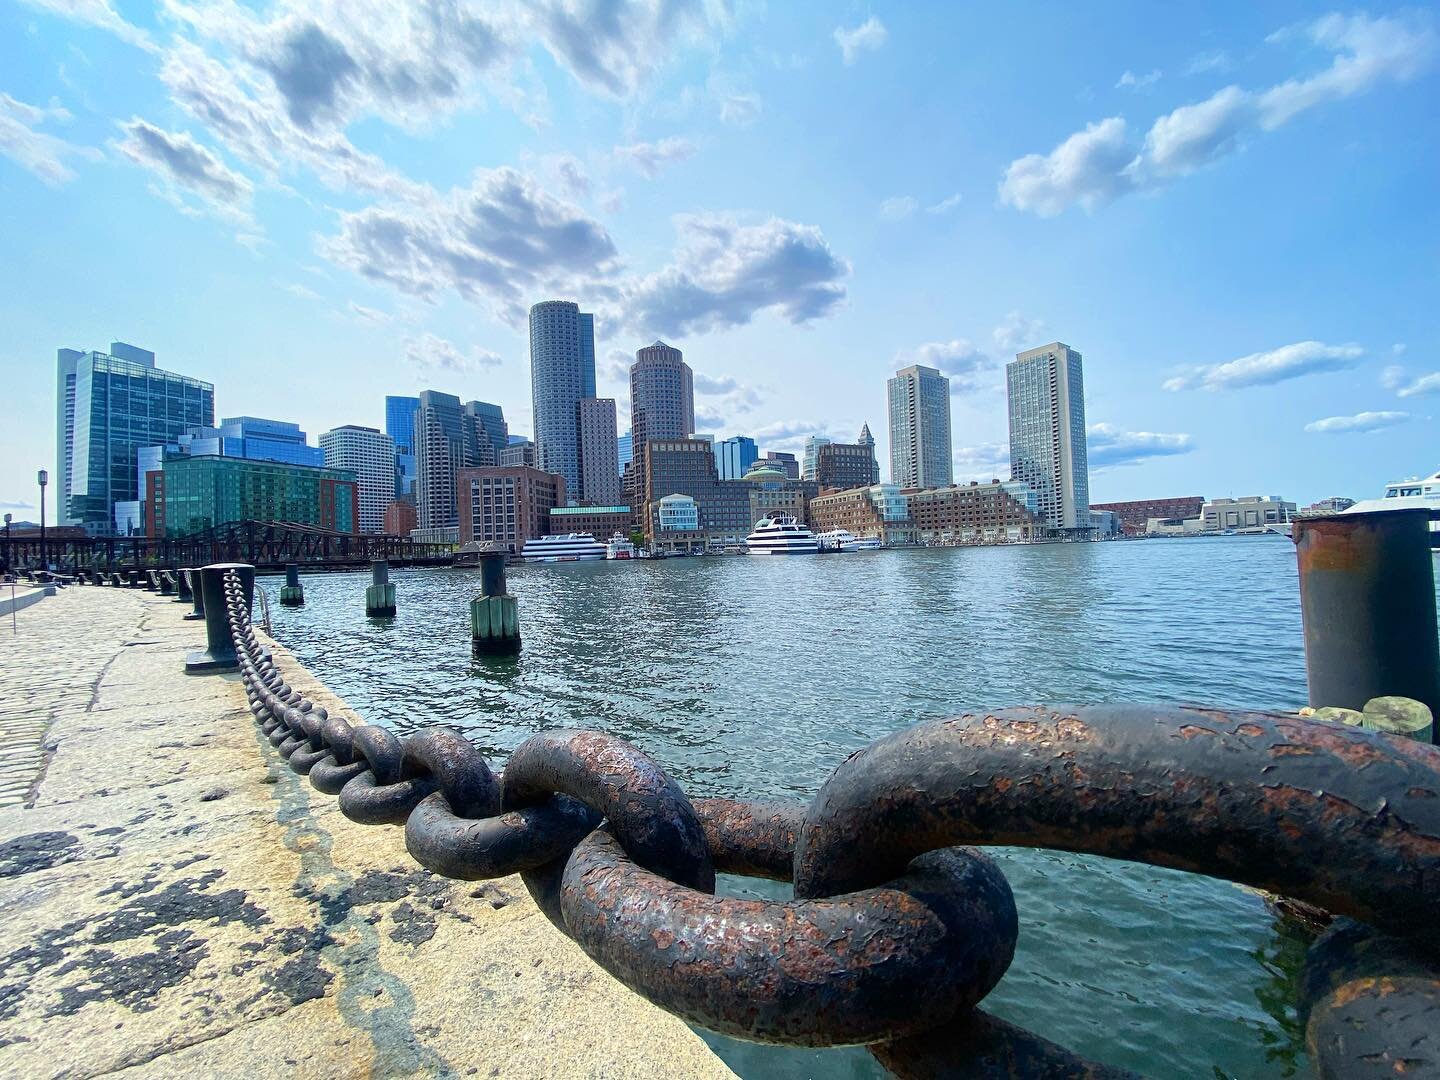 #tbt to the Boston waterfront. My favorite new peer City for San Francisco.